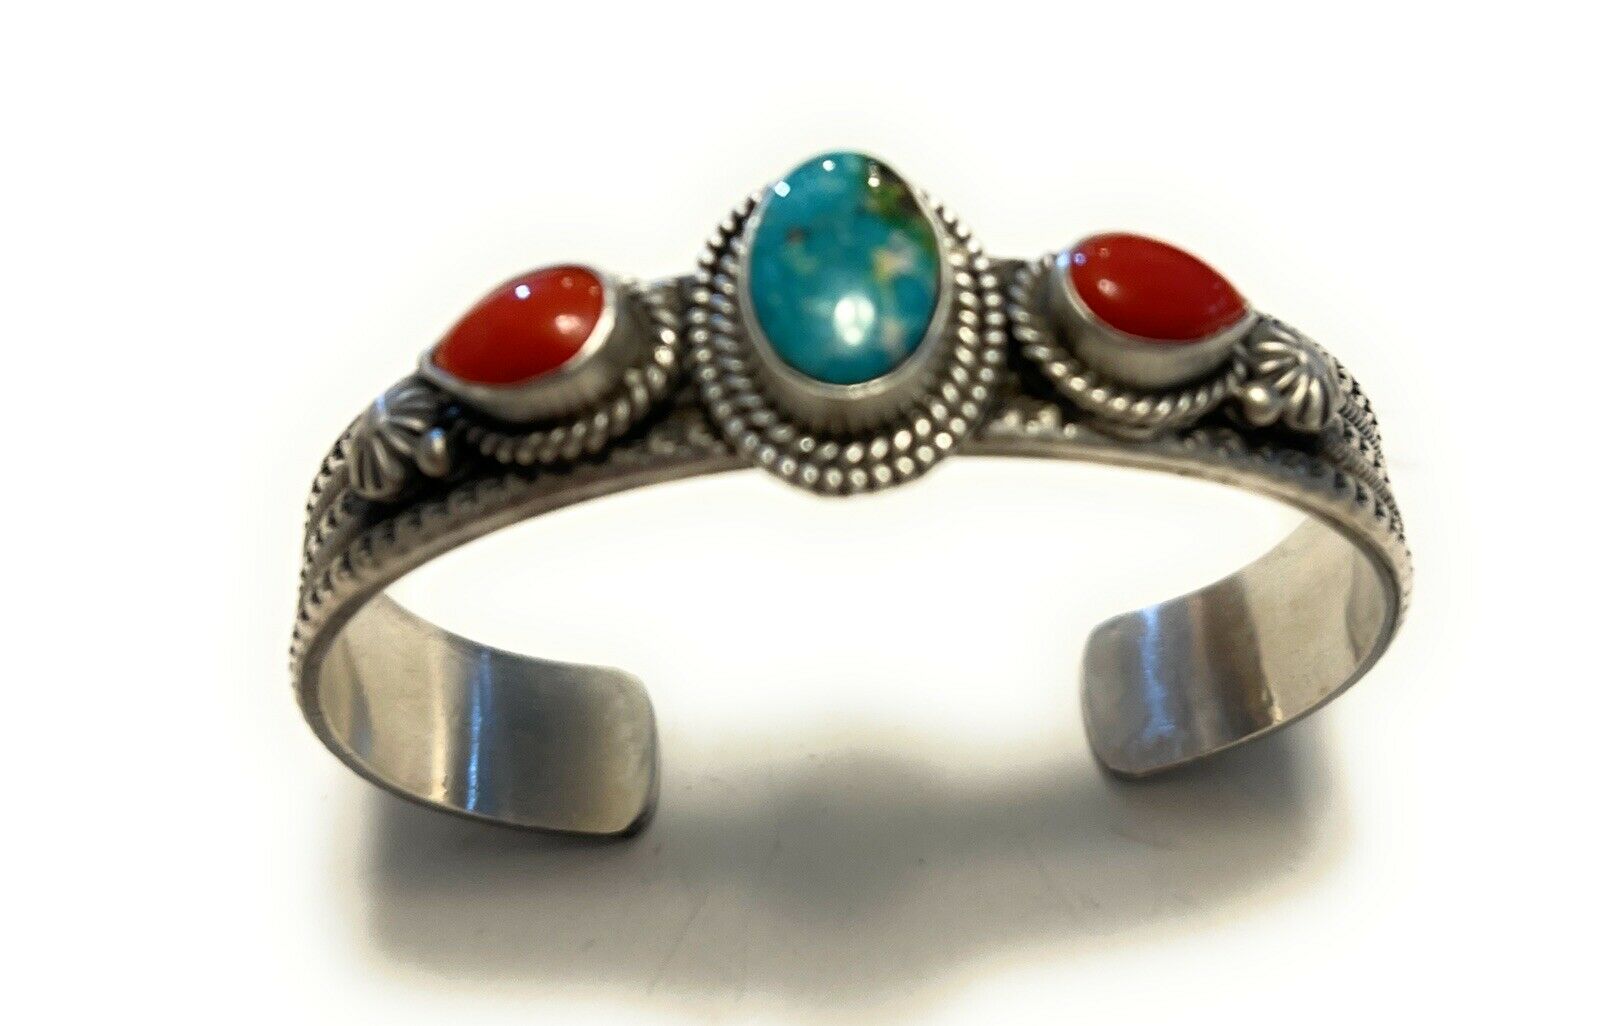 Artisan stone chip beads bracelet Turquoise Blue stabilized Red Coral  weaved strung silver metal toggle bracelet